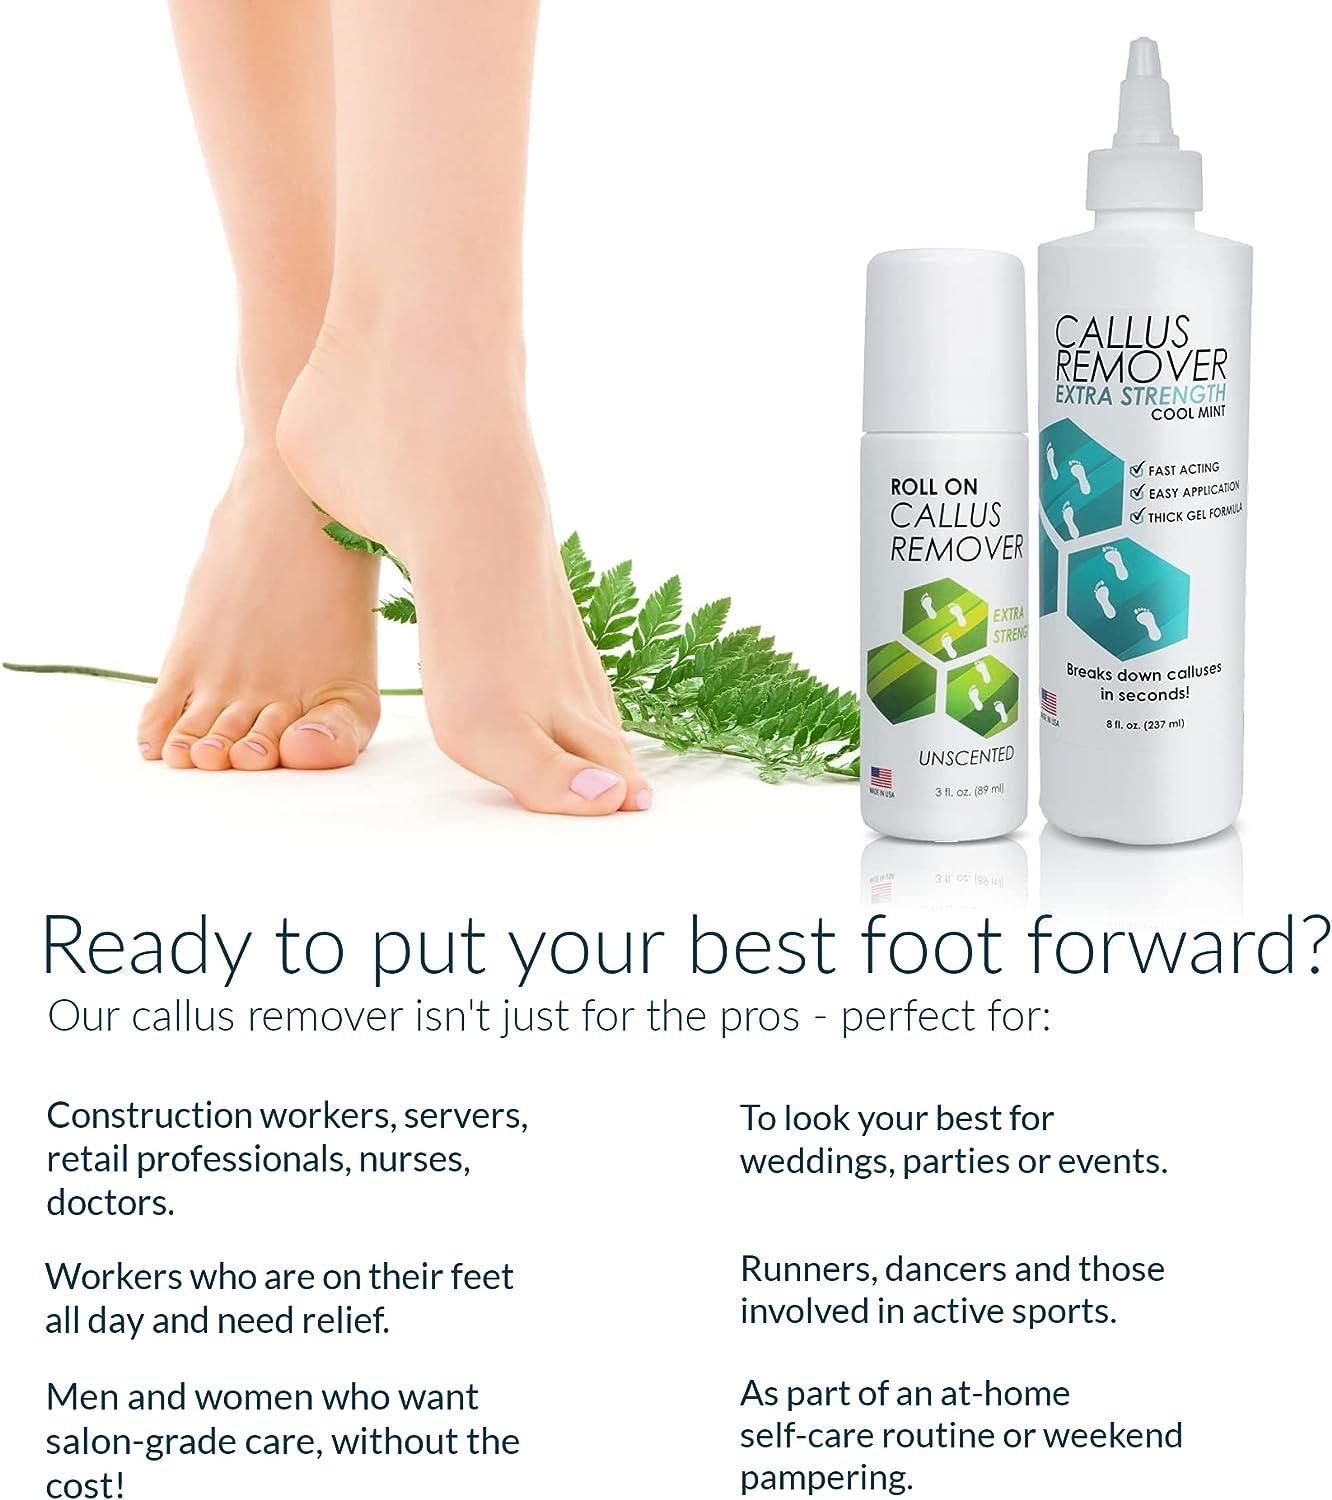 Flowery - Liquidator Callus Remover For Feet, Professional or at Home  Pedicure Treatment, Soothing Mint Scent, 4 Oz (Pack of 2)